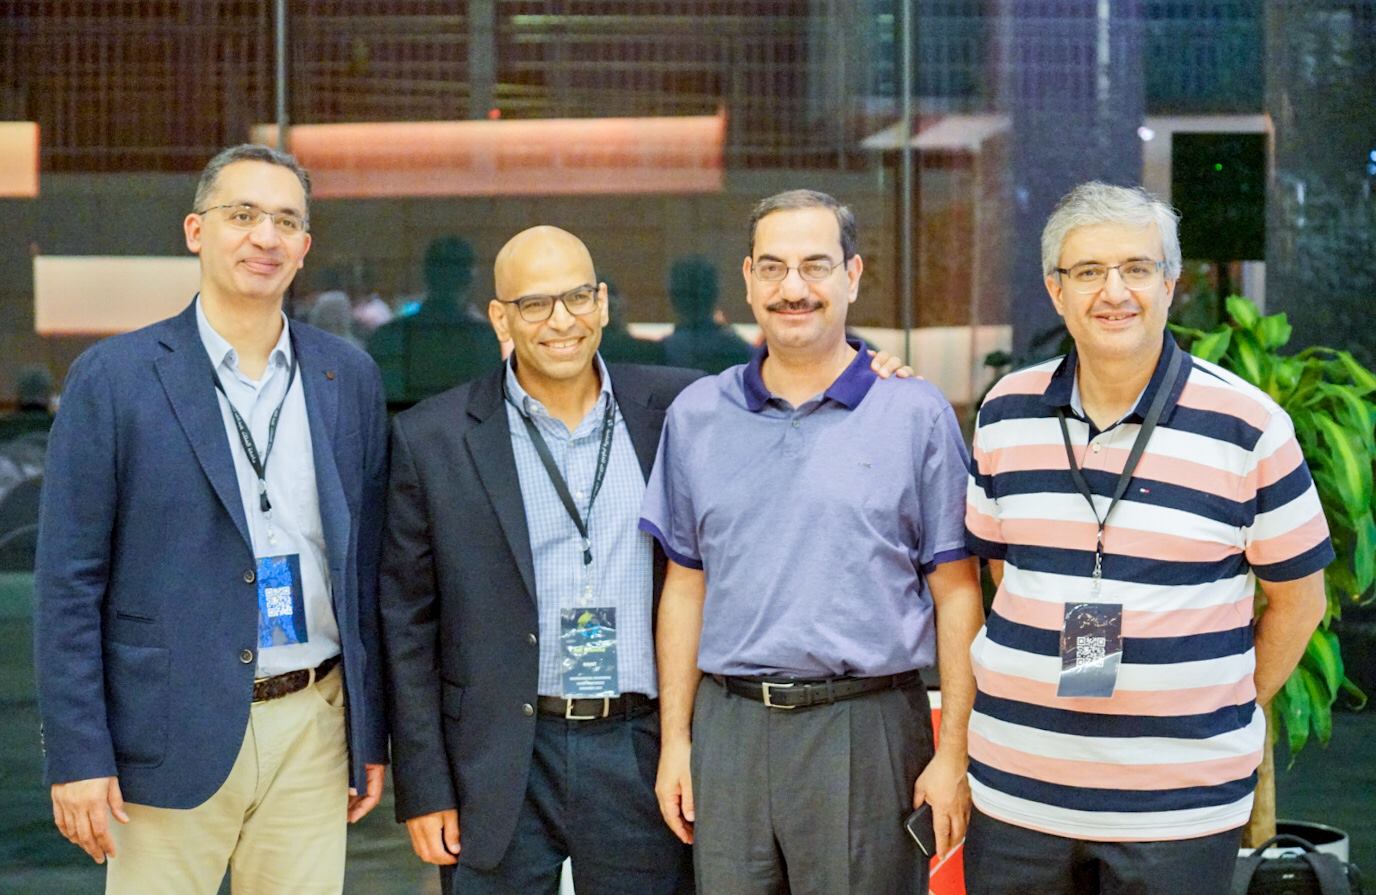 In the company of World-renowned Electrical Engineers: Jeff Shamma, Ali Sayed, & Slim Alouini